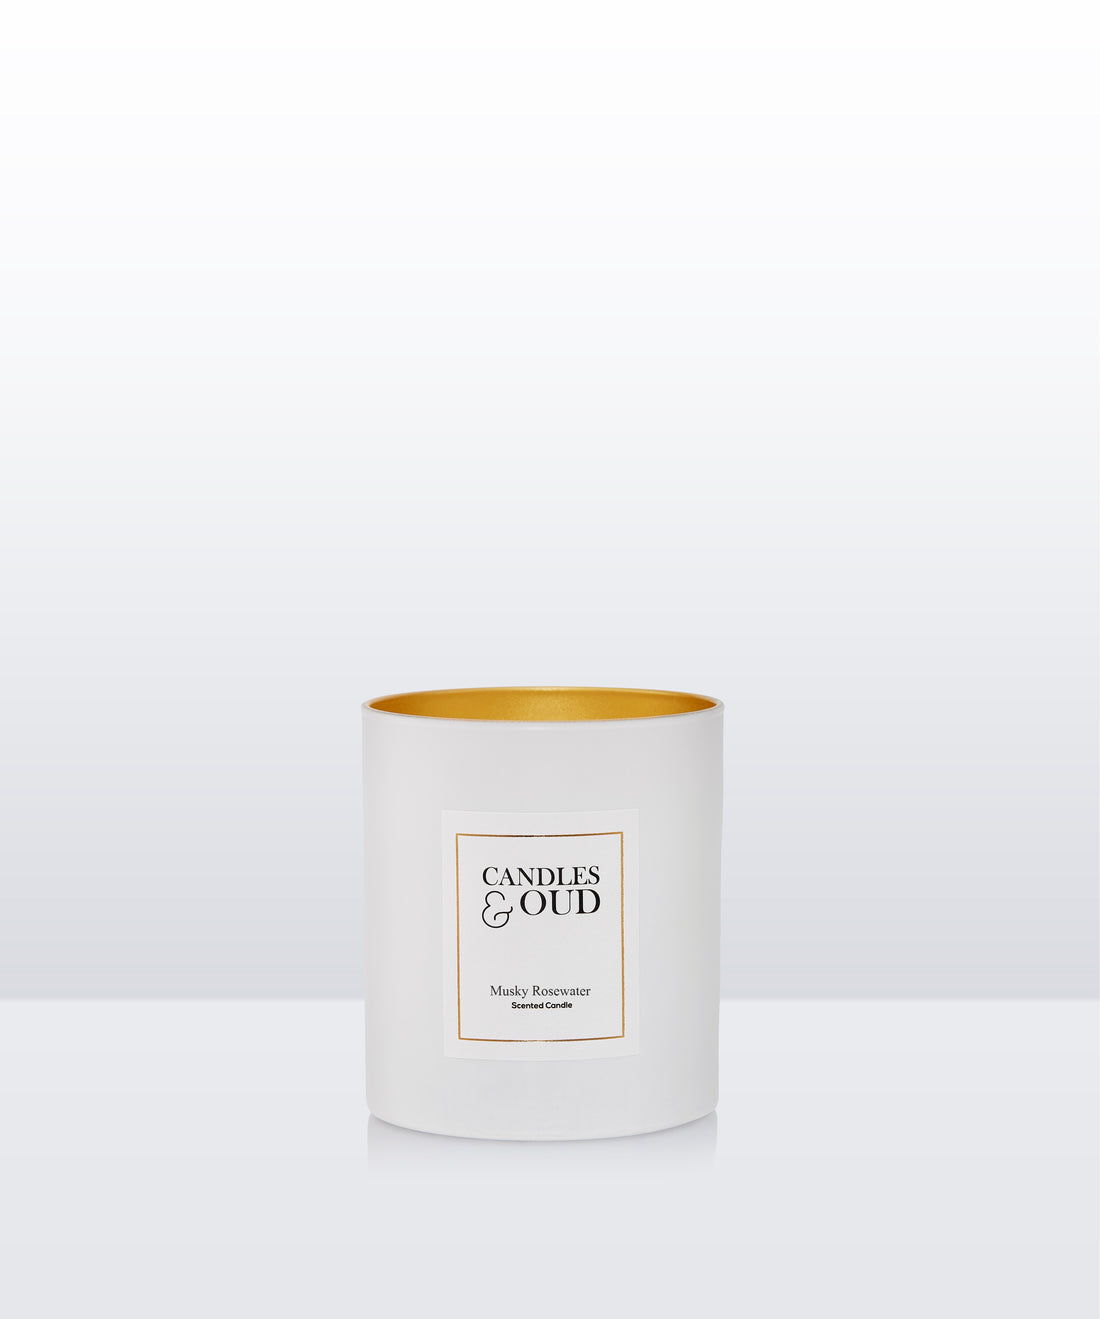 Musky Rosewater Candle